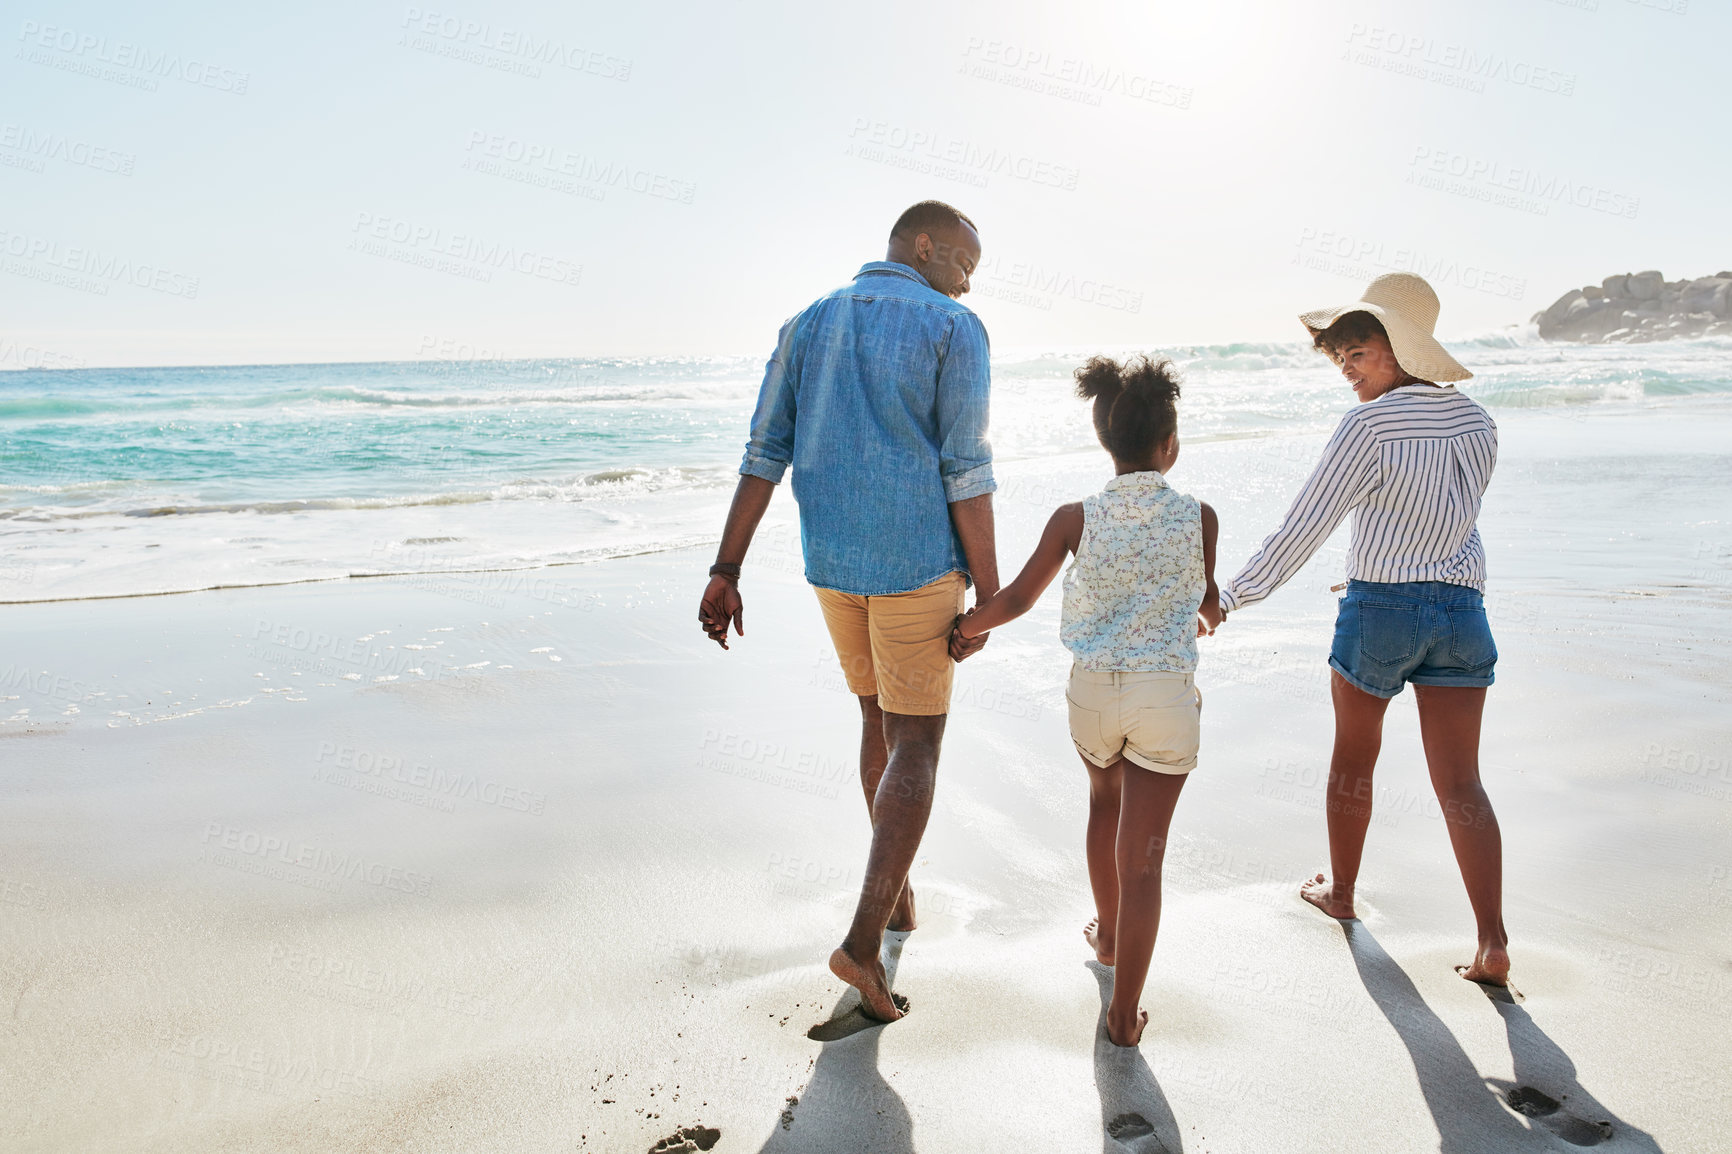 Buy stock photo Shot of an adorable little girl going for a walk with her parents on the beach